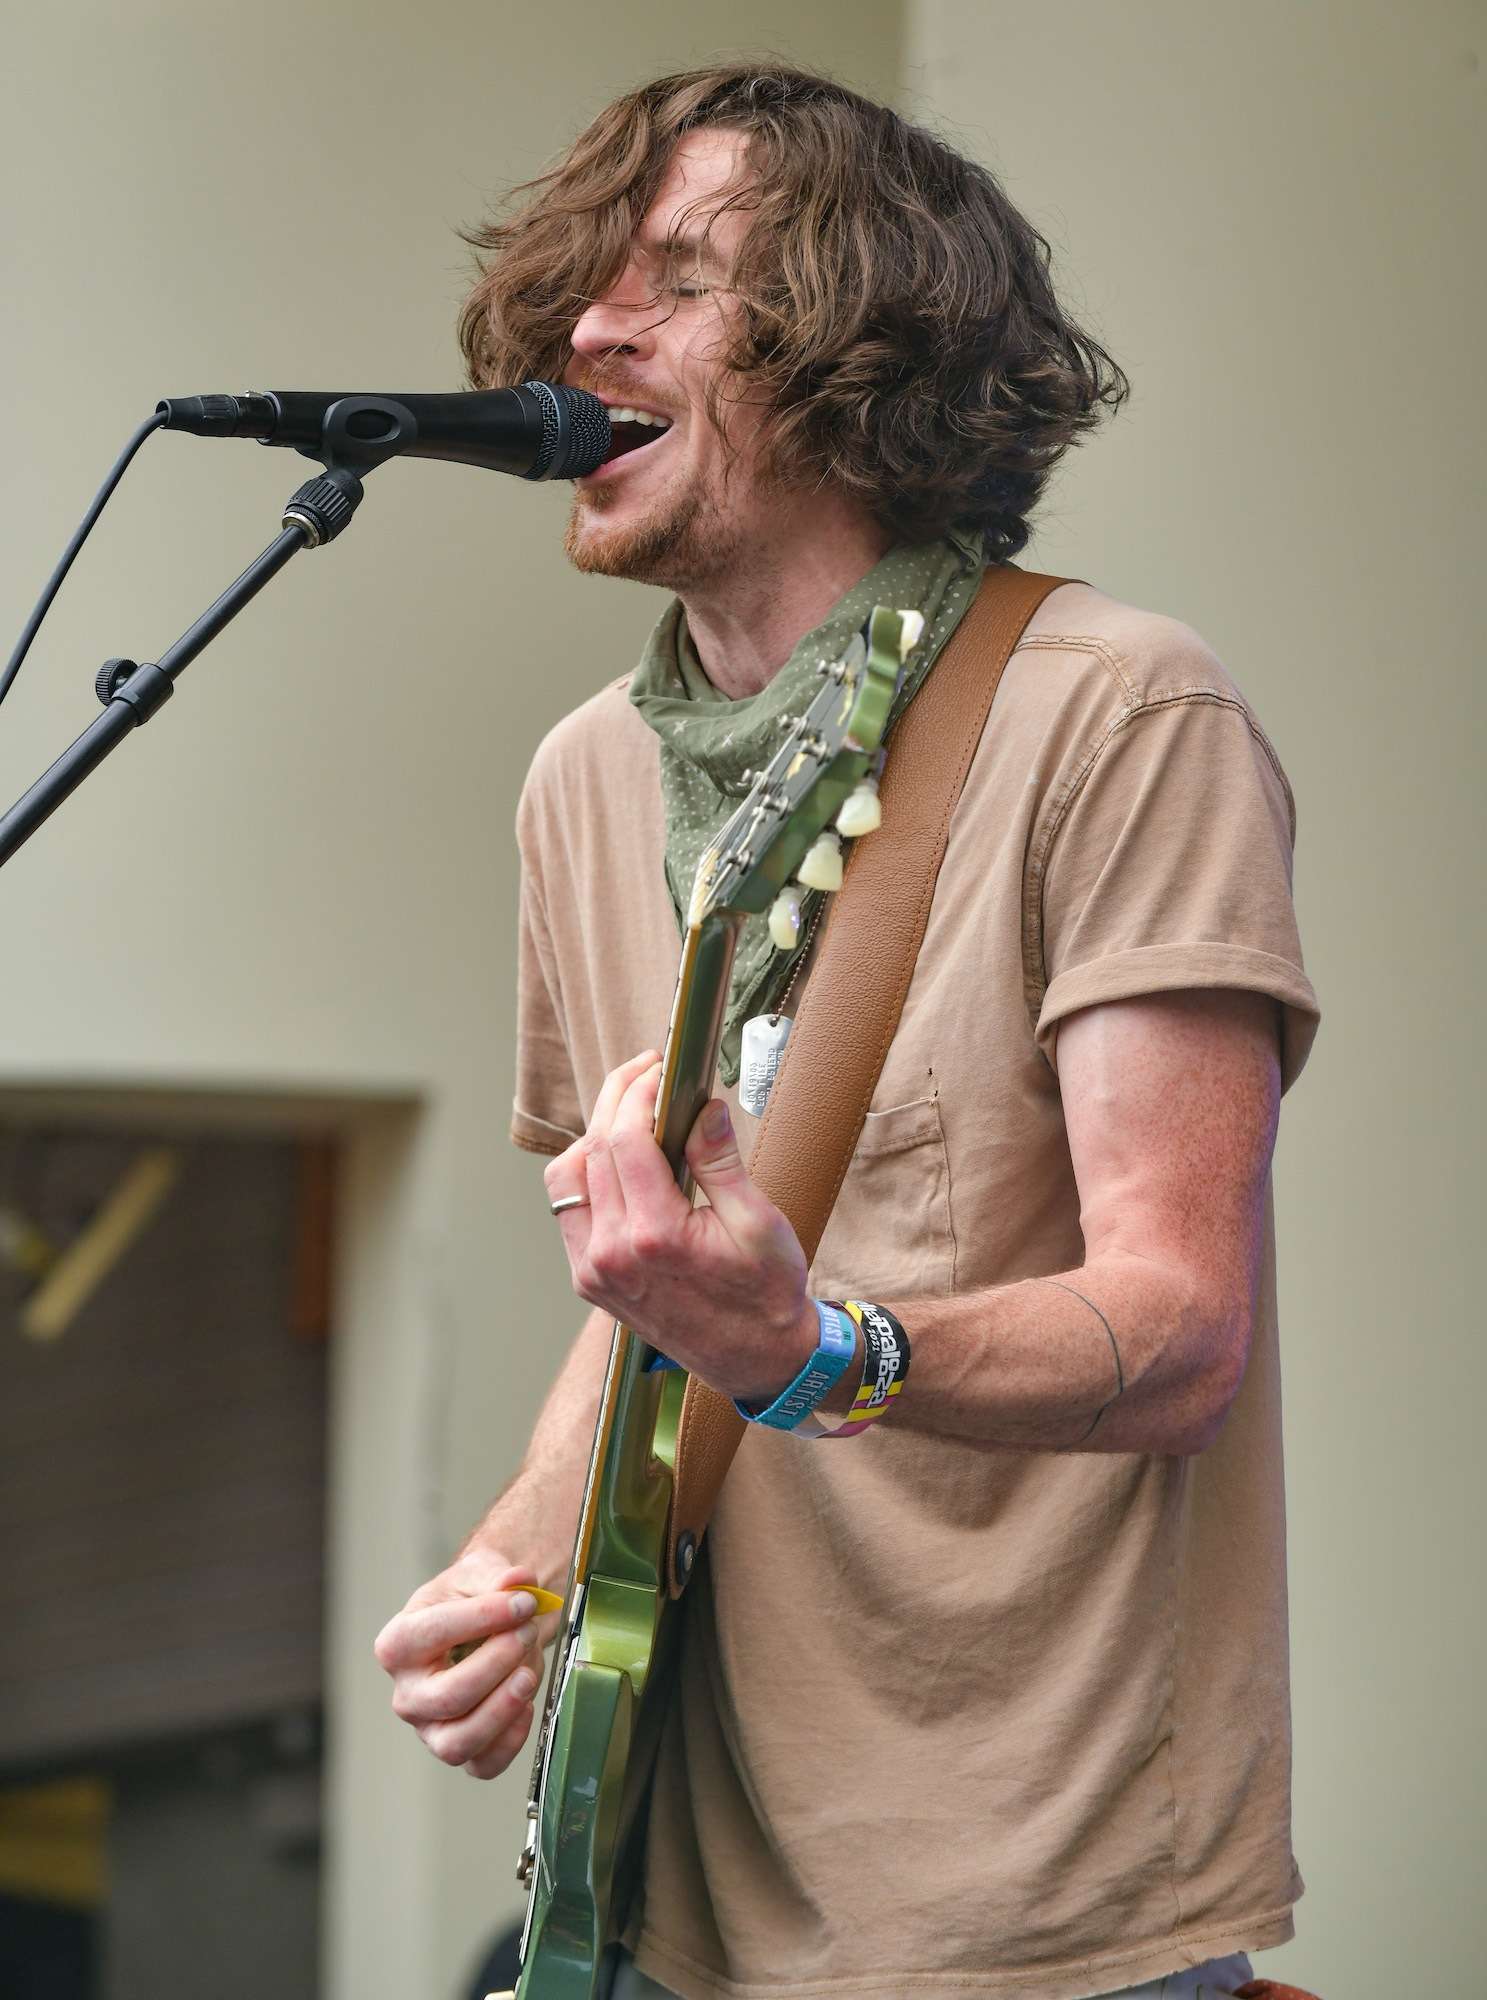 Black Pistol Fire Live at Lollapalooza [GALLERY] 3